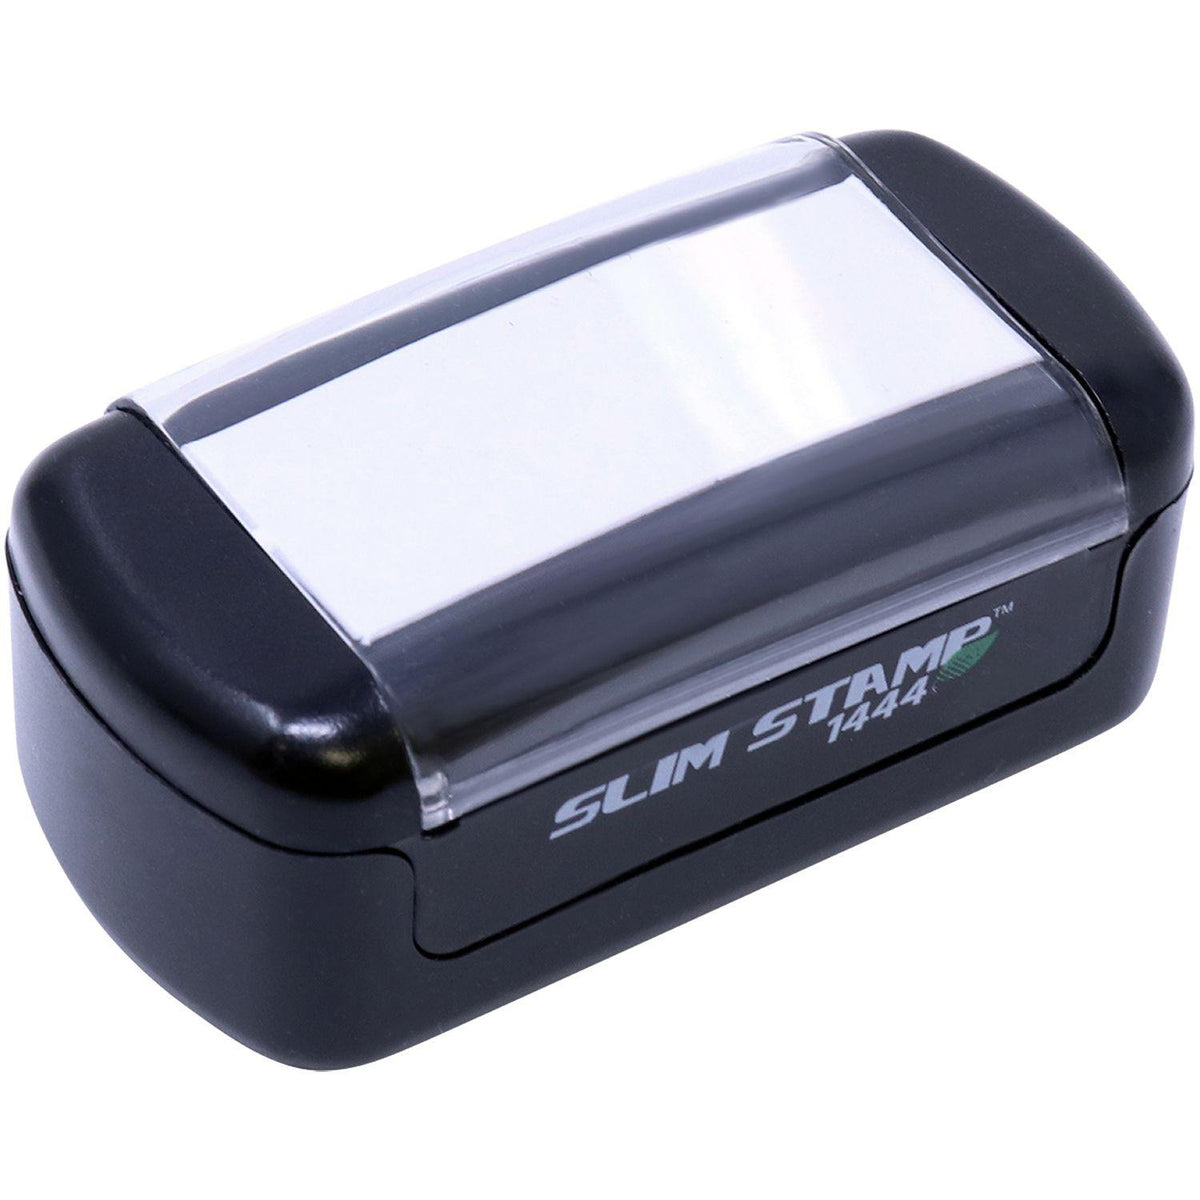 Slim Pre-Inked Bold Deceased Stamp - Engineer Seal Stamps - Brand_Slim, Impression Size_Small, Stamp Type_Pre-Inked Stamp, Type of Use_Medical Office